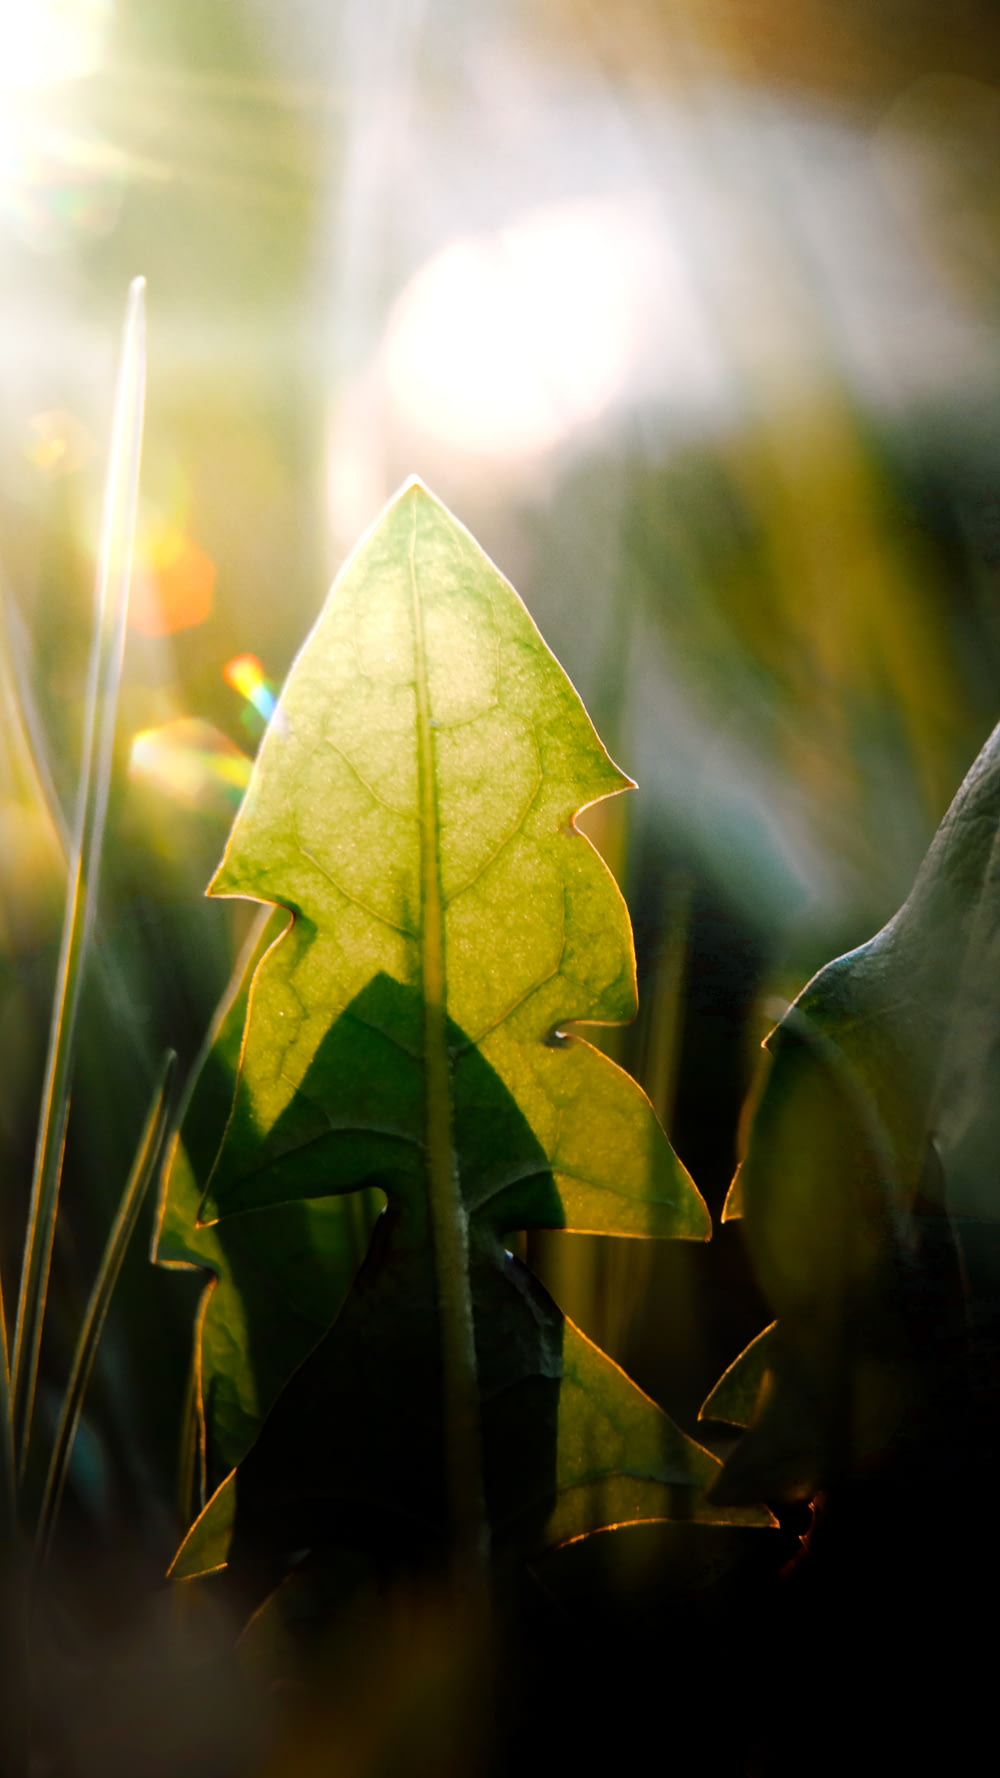 a close up of a leaf in the grass